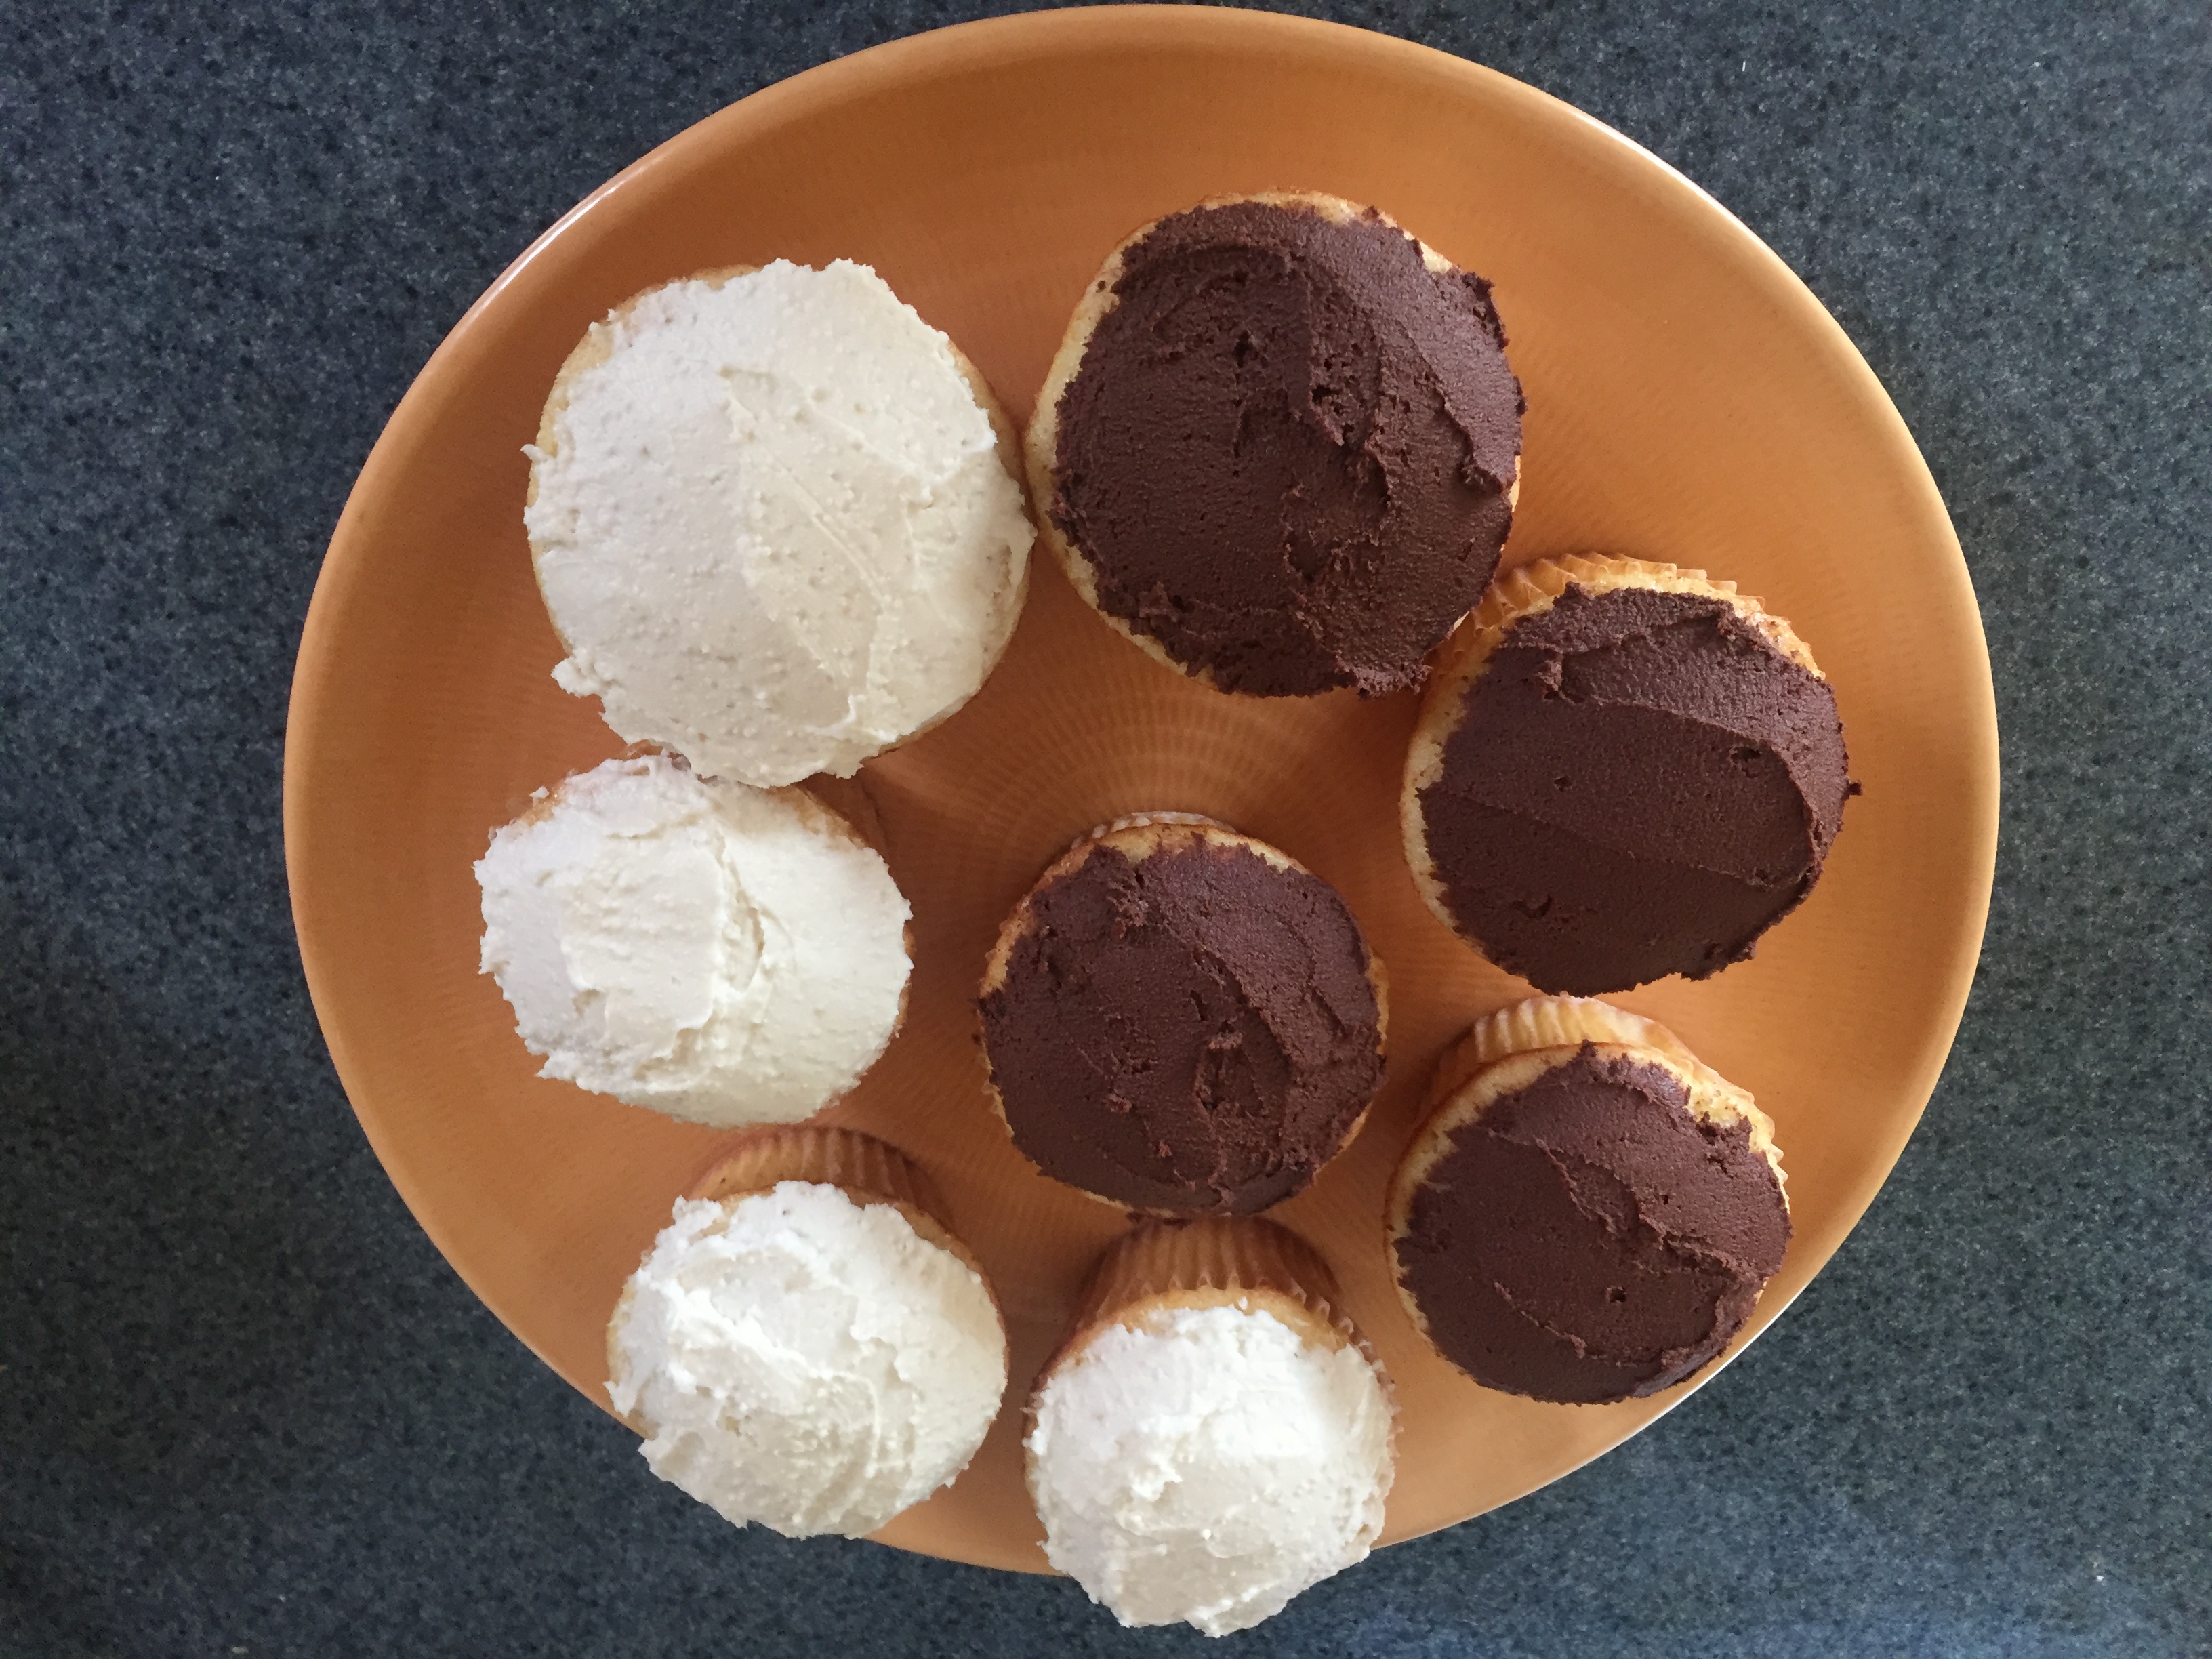 Four cupcakes with chocolate frosting and four cupcakes with vanilla frosting arranged on an orange plate.